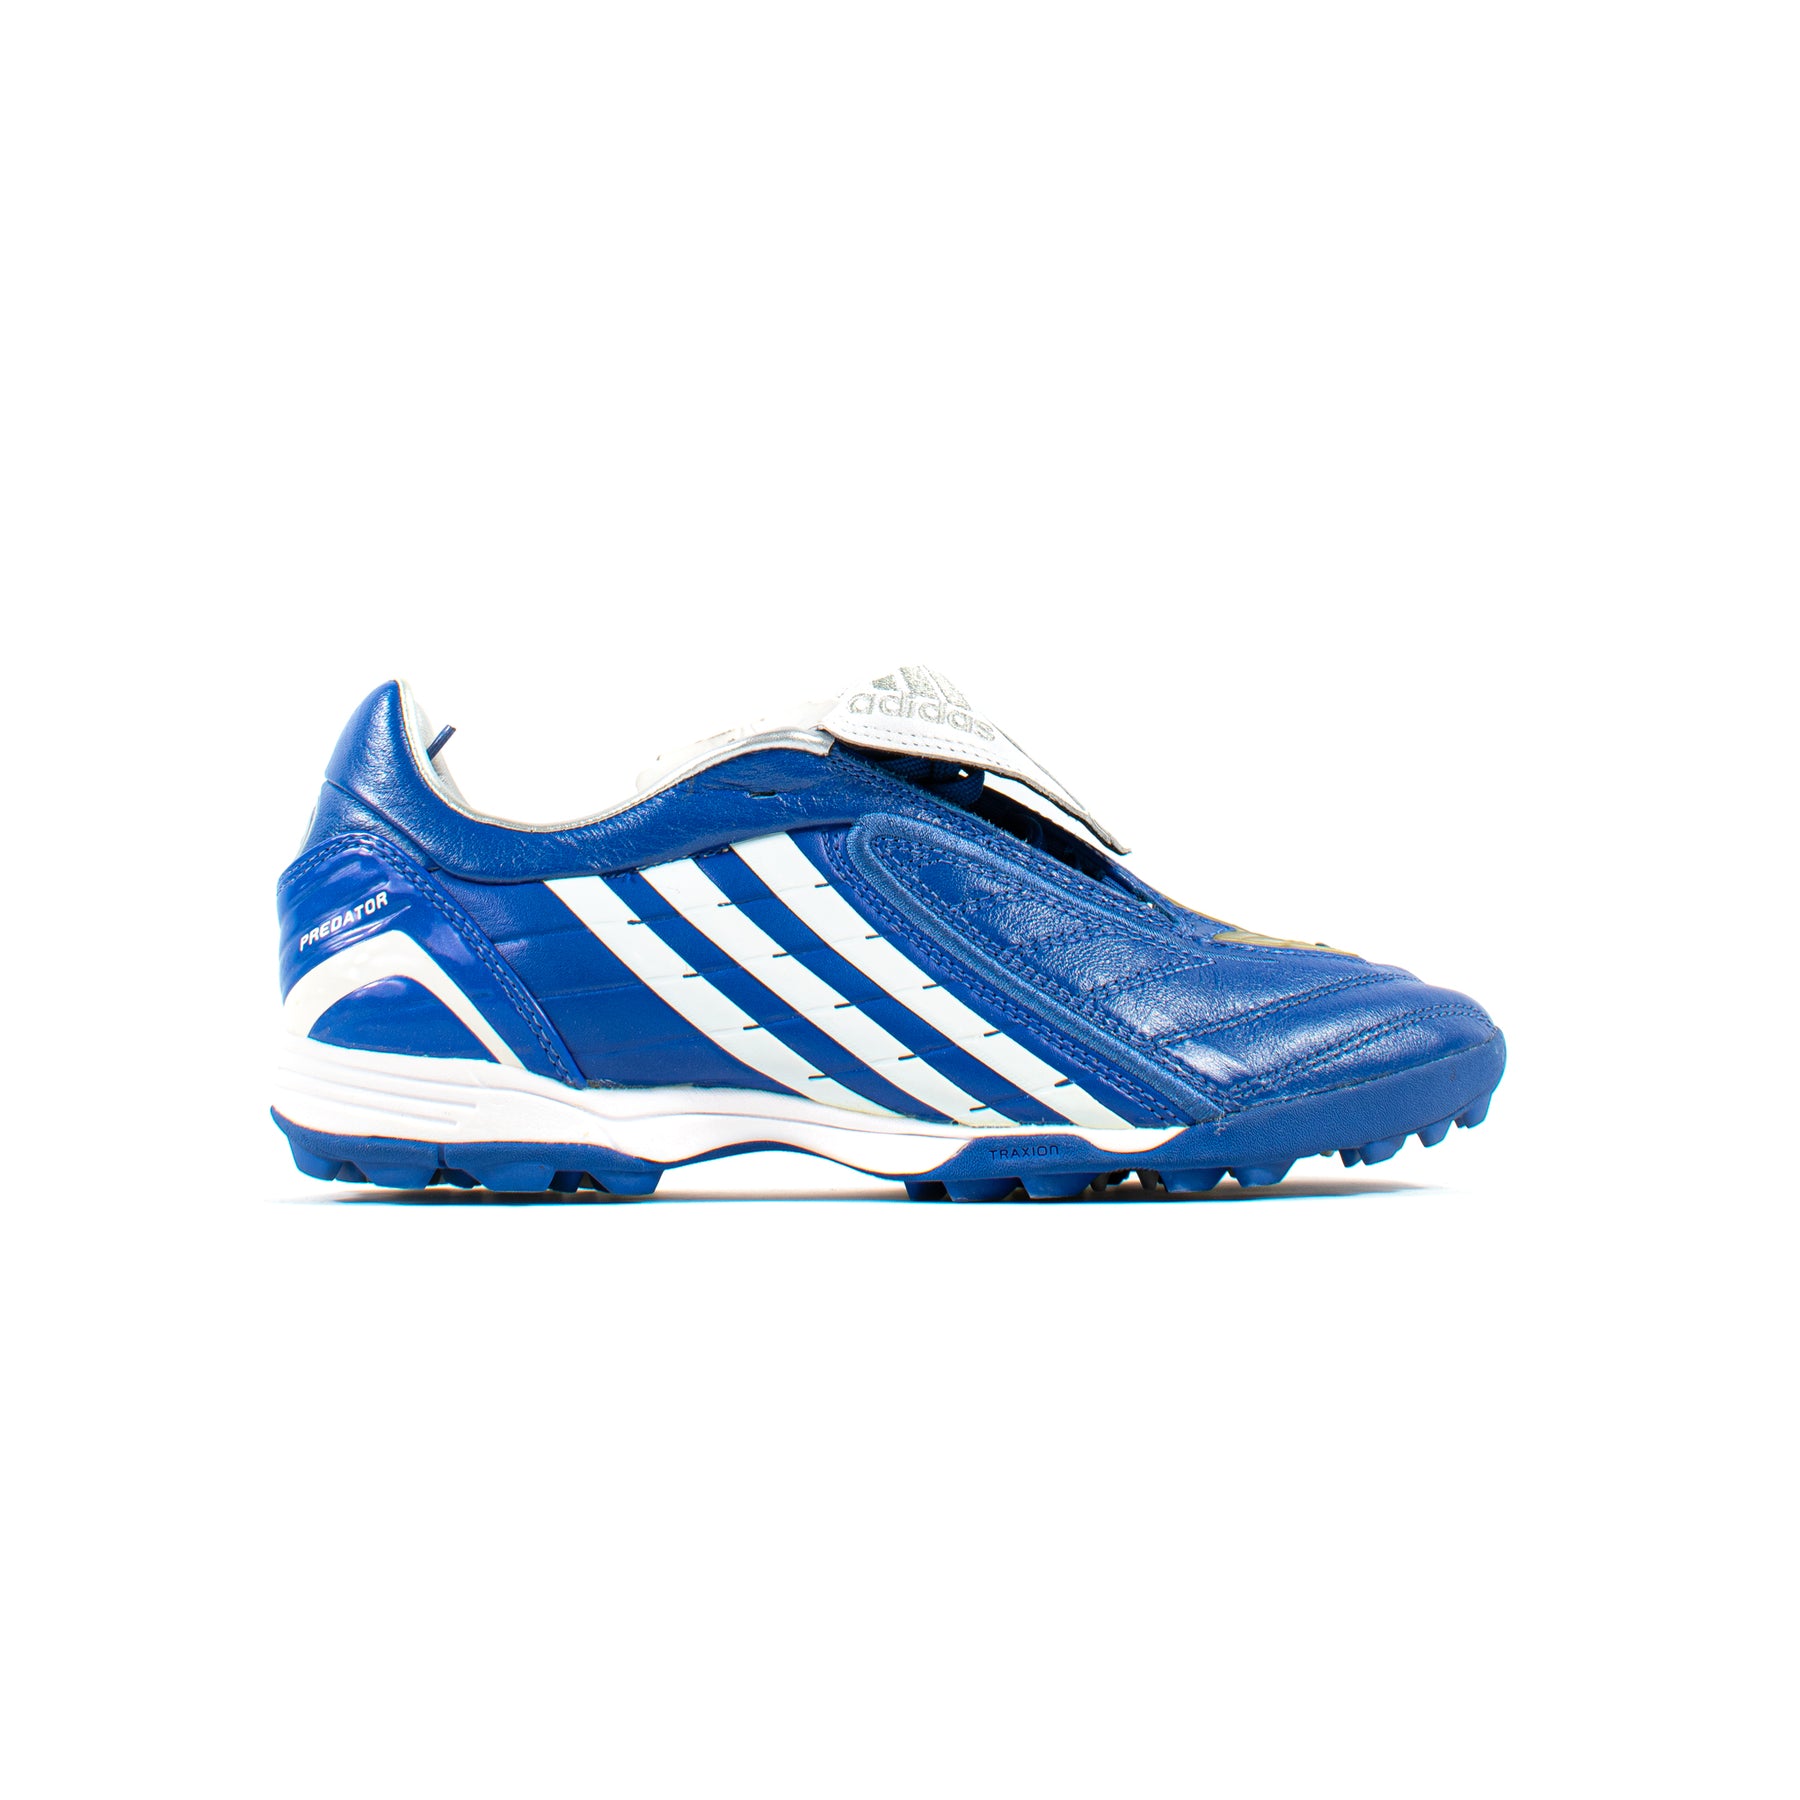 Adidas Predator Absolion Powerswerve Turf – Classic Soccer Cleats